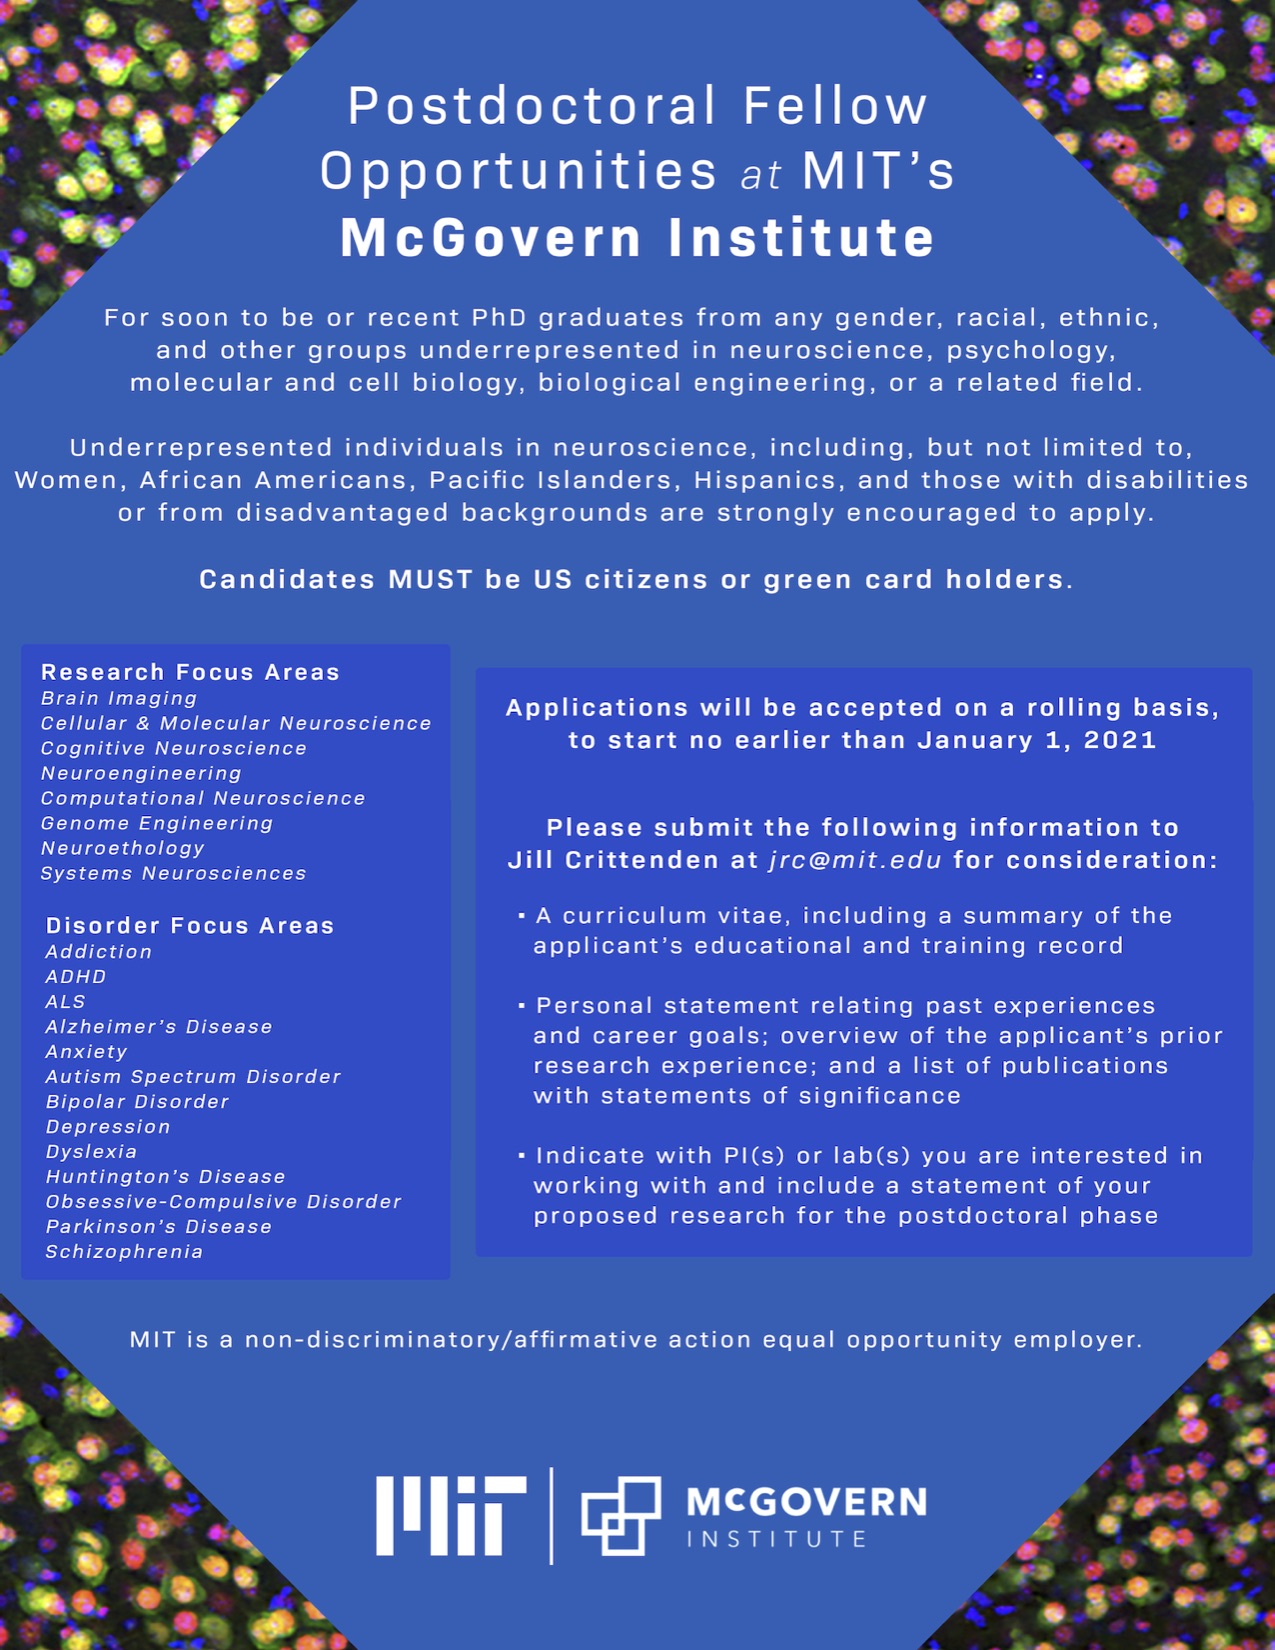 Postdoctoral fellow opportunities at MIT's McGovern Institute. For soon to be or recent PhD graduates from any gender, racial, ethnic, and other groups underrepresented in neuroscience, psychology, molecular and cell biology, biological engineering, or a related field. Underrepresented individuals in neursocience, including, but not limited to, Women, African Americans, Pacific Islanders, Hispanics, and those with disabilities or from disadvantaged backgrounds are strongly encouraged to apply. Candidates must be US Citizens or green card holders. Research Focus areas include: brain imaging, cellular and molecular neuroscience, cognitive neuroscience, neuroengineering, computational neuroscience, genome engineering, neuroethology, and systems neuroscience. Disorder focus areas include: Addiction, ADHD, ALS, Alzheimer's Disease, Anxiety, Autism Spectrum Disorder, Bipolar Disorder, Depression, Dyslexia, Huntington's Disease, Obsessive-Compulsive Disorder, Parkinson's Disease, and Schizophrenia. Applications will be accepted on a rolling basis, to start no earlier than January 1, 2021. Please submit the following information to Jill Crittenden at jrc@mit.edu for consideration. One, A curriculum vitae, including a summary of the applicant's educational and training record. Two, a personal statement relating past experiences and career goals; overview of the applicant's prior research experience, and a list of publications with statements of significance. Three, indicate which principal investigator/s or lab/s you are interested in working with and include a statement of your proposed research for the postdoctoral phase. MIT is a non-discriminatory / affirmative action equal opportunity employer.